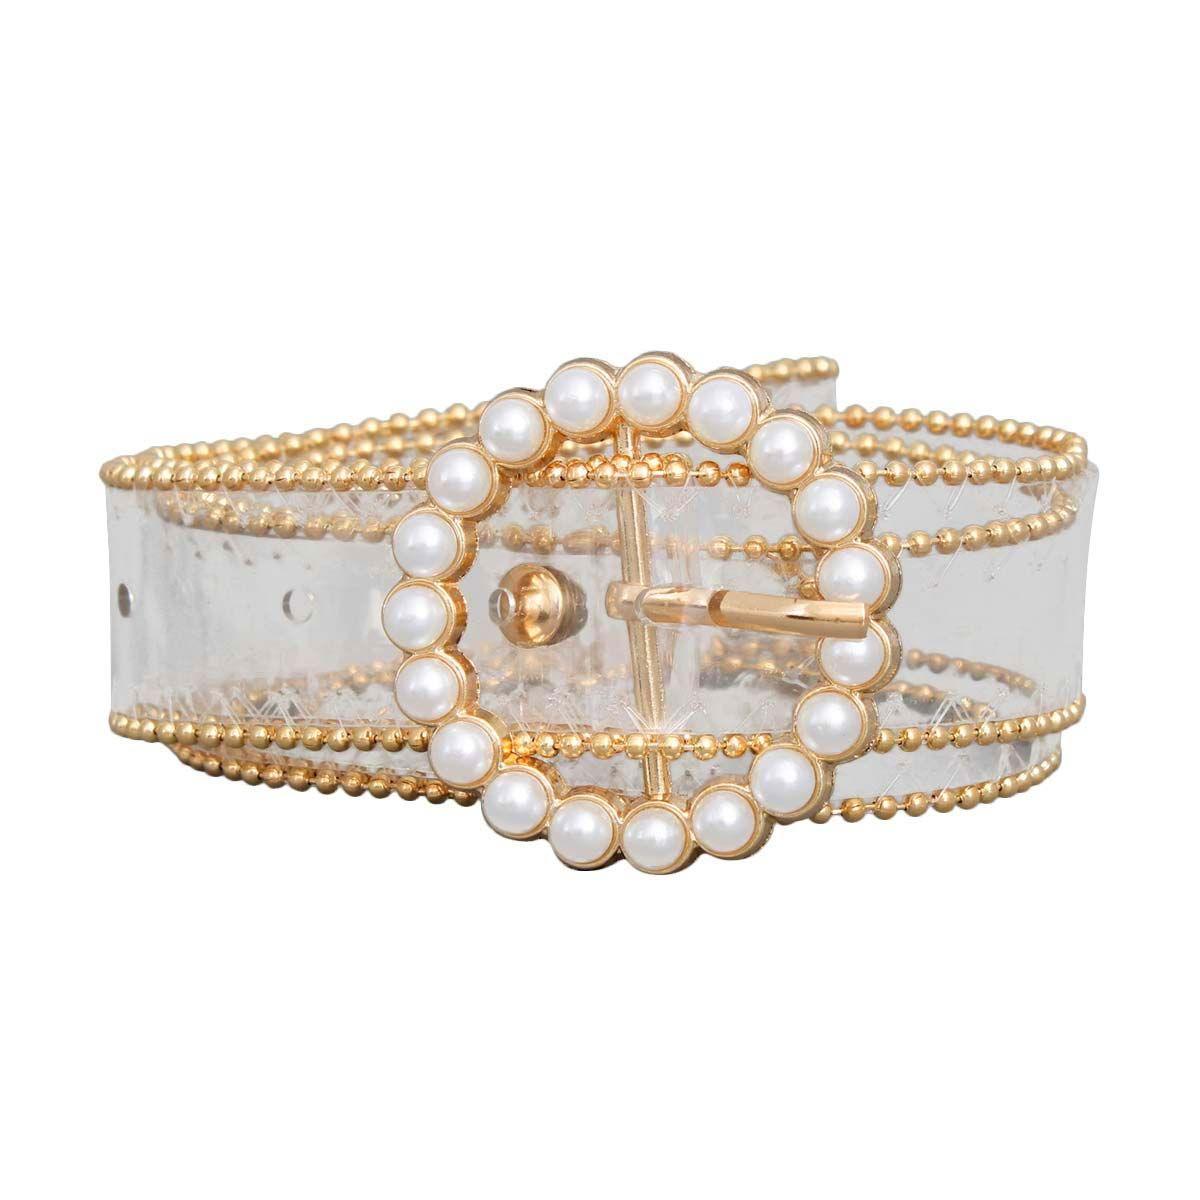 Transparent Belt Gold Tone and Pearlized Bead Embellished